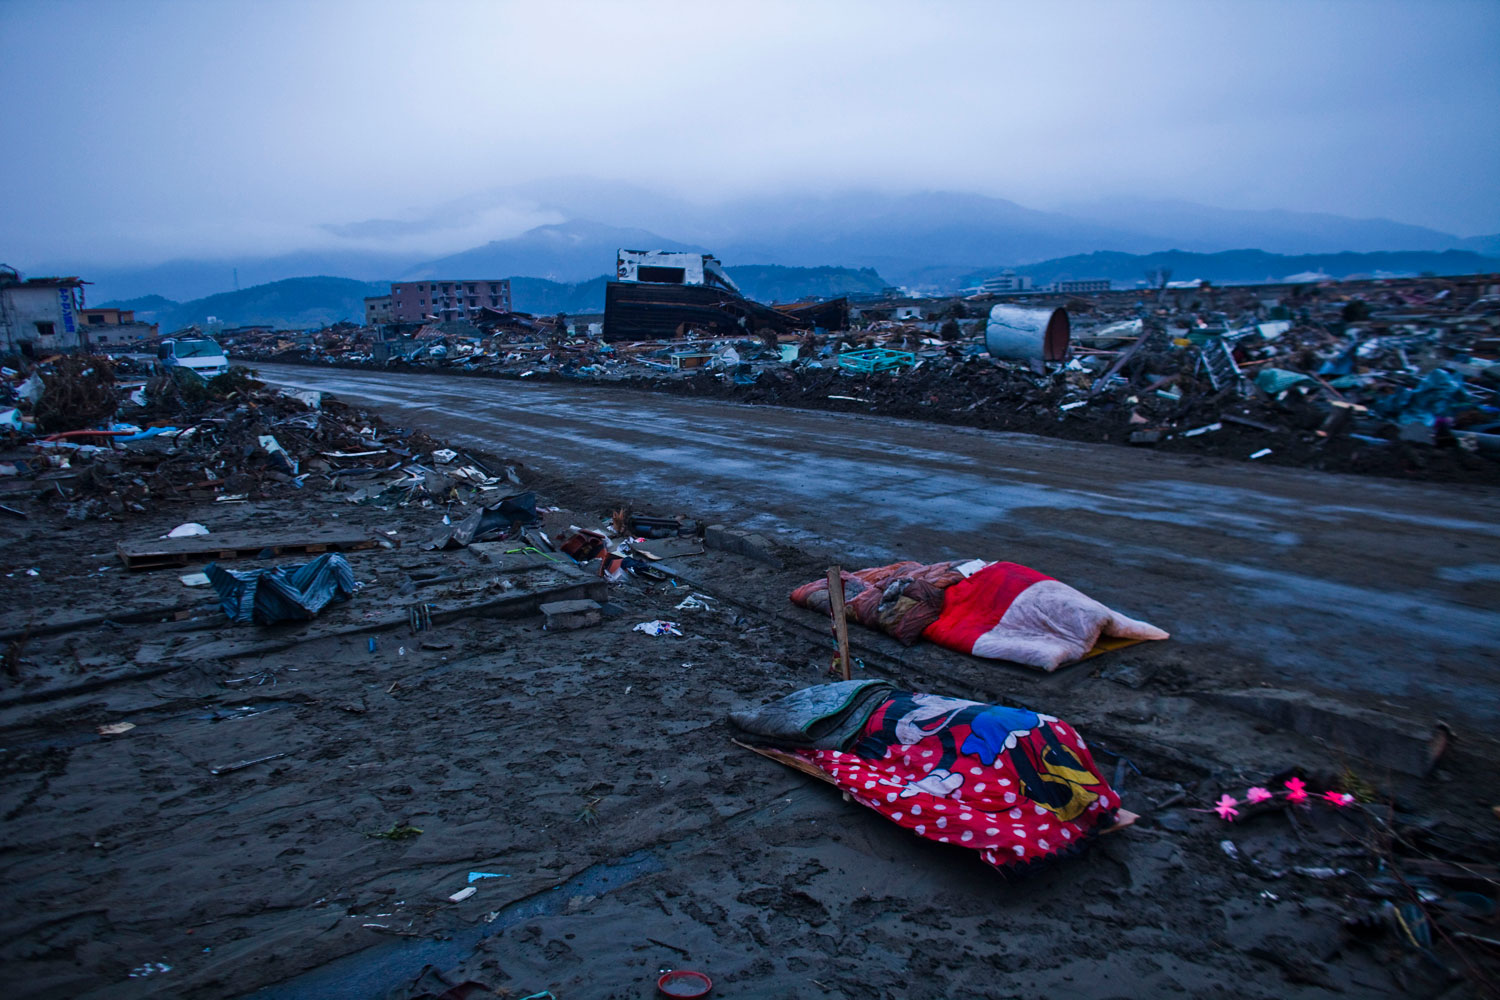 Two bodies are left covered by blankets near the rubble of Rikuzenmaeda, Iwate prefecture, Japan, March 15, 2011.